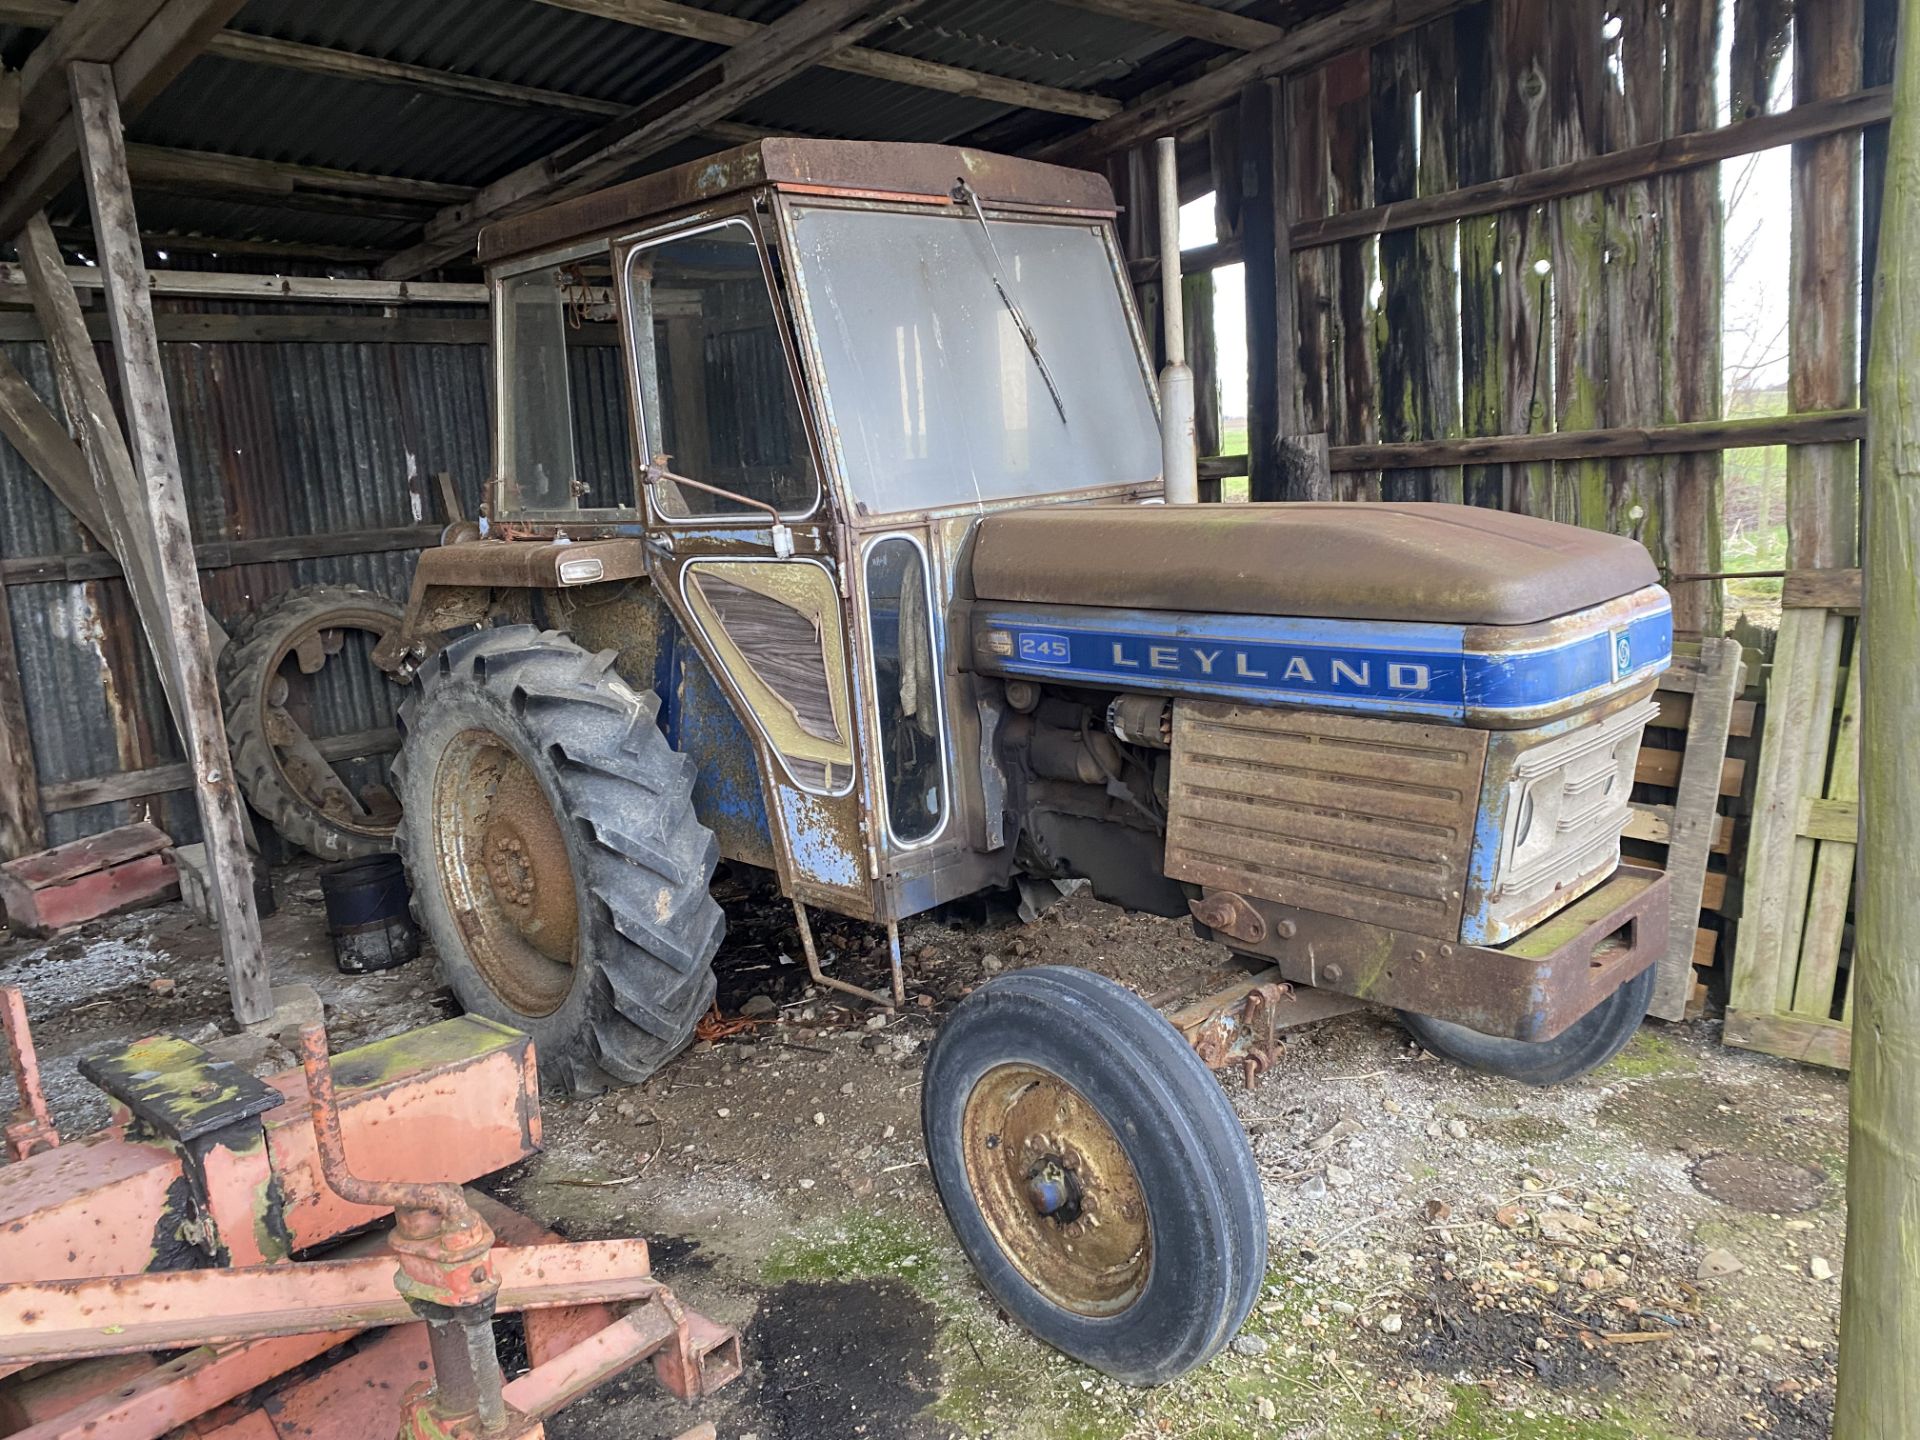 (75) Leyland 245 2wd tractor, 8,500 hrs, Reg KCT 534P, one owner from new, manual in office